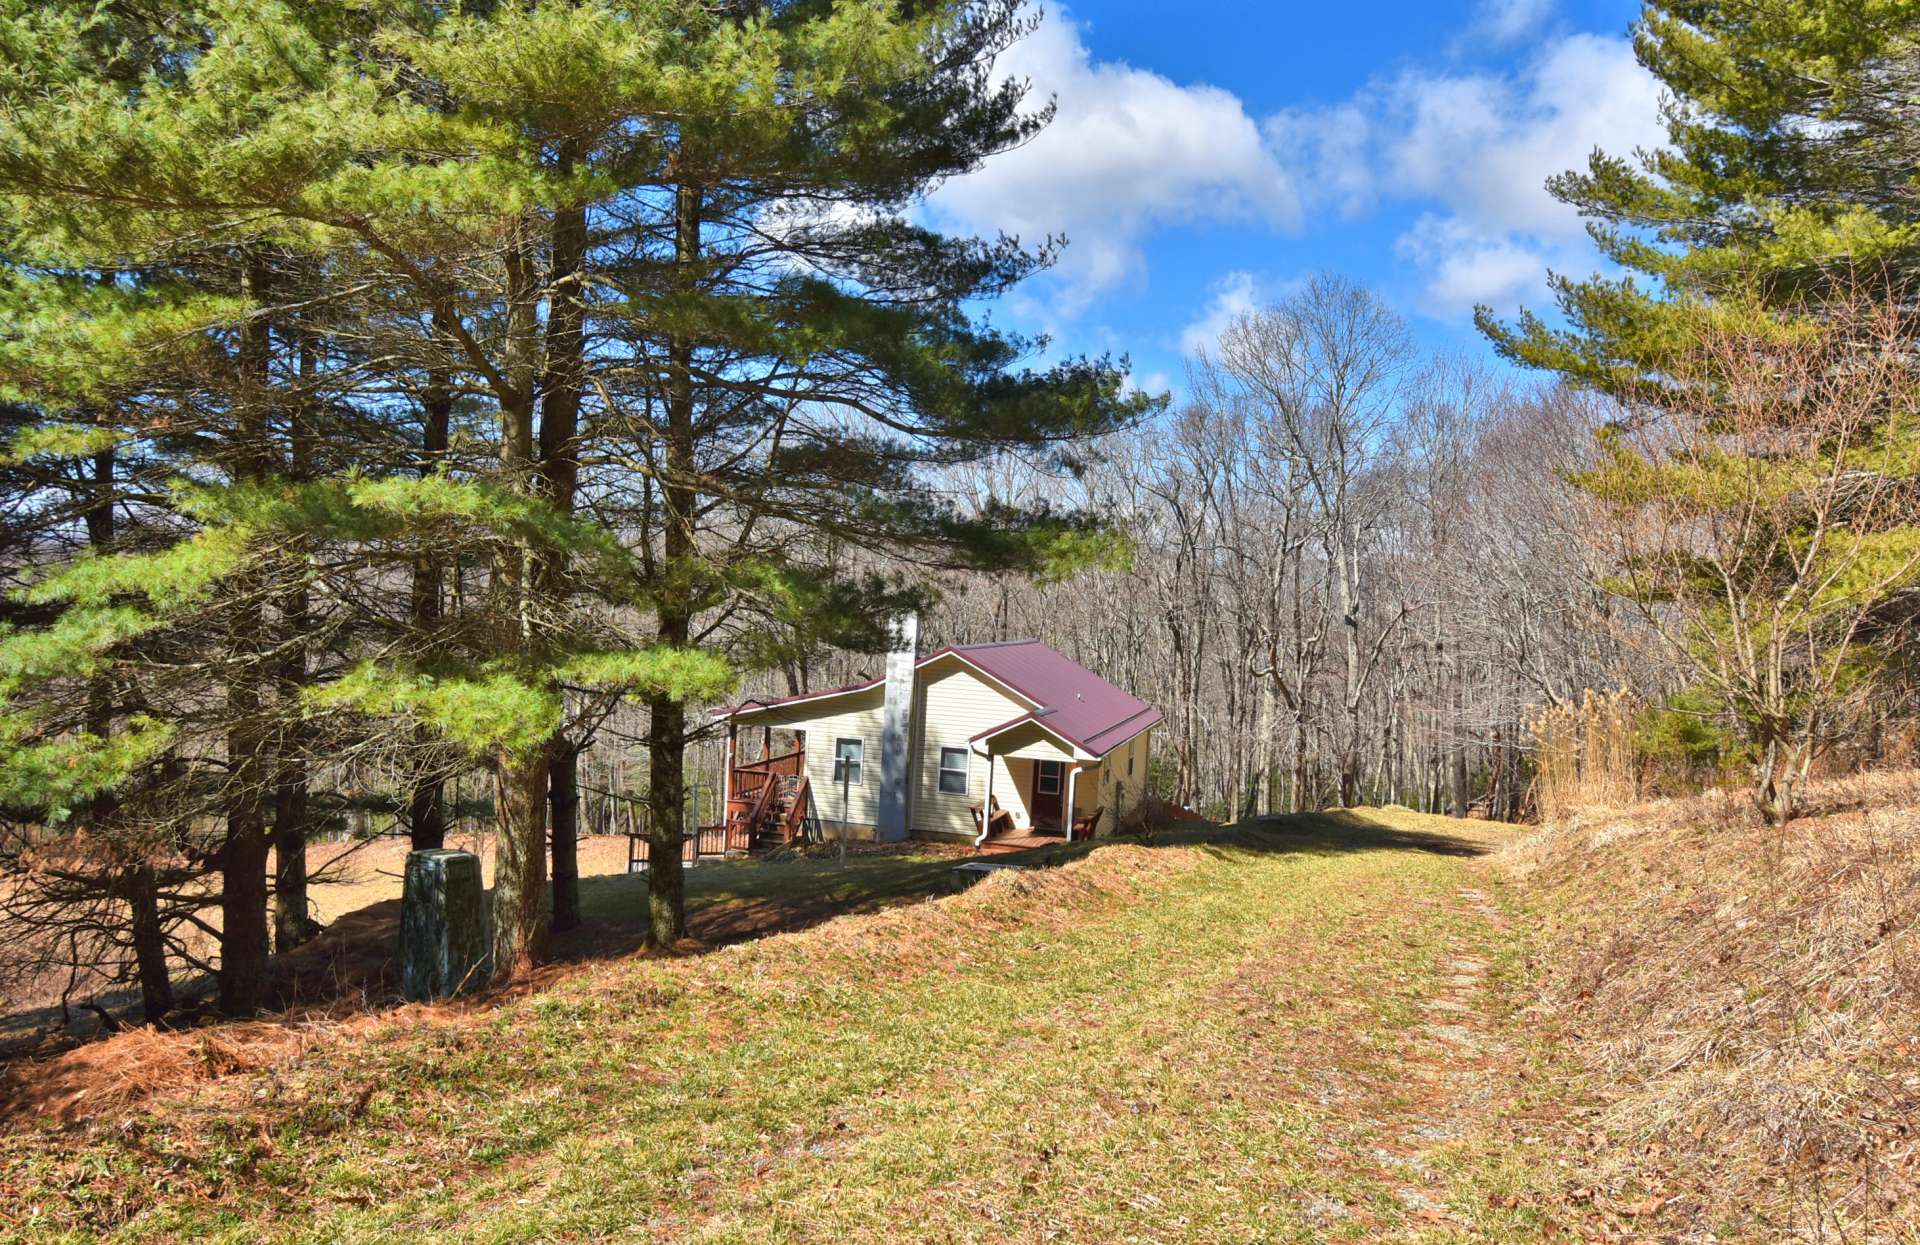 A private drive brings you to this cozy cottage hidden away on 6.95 acres.